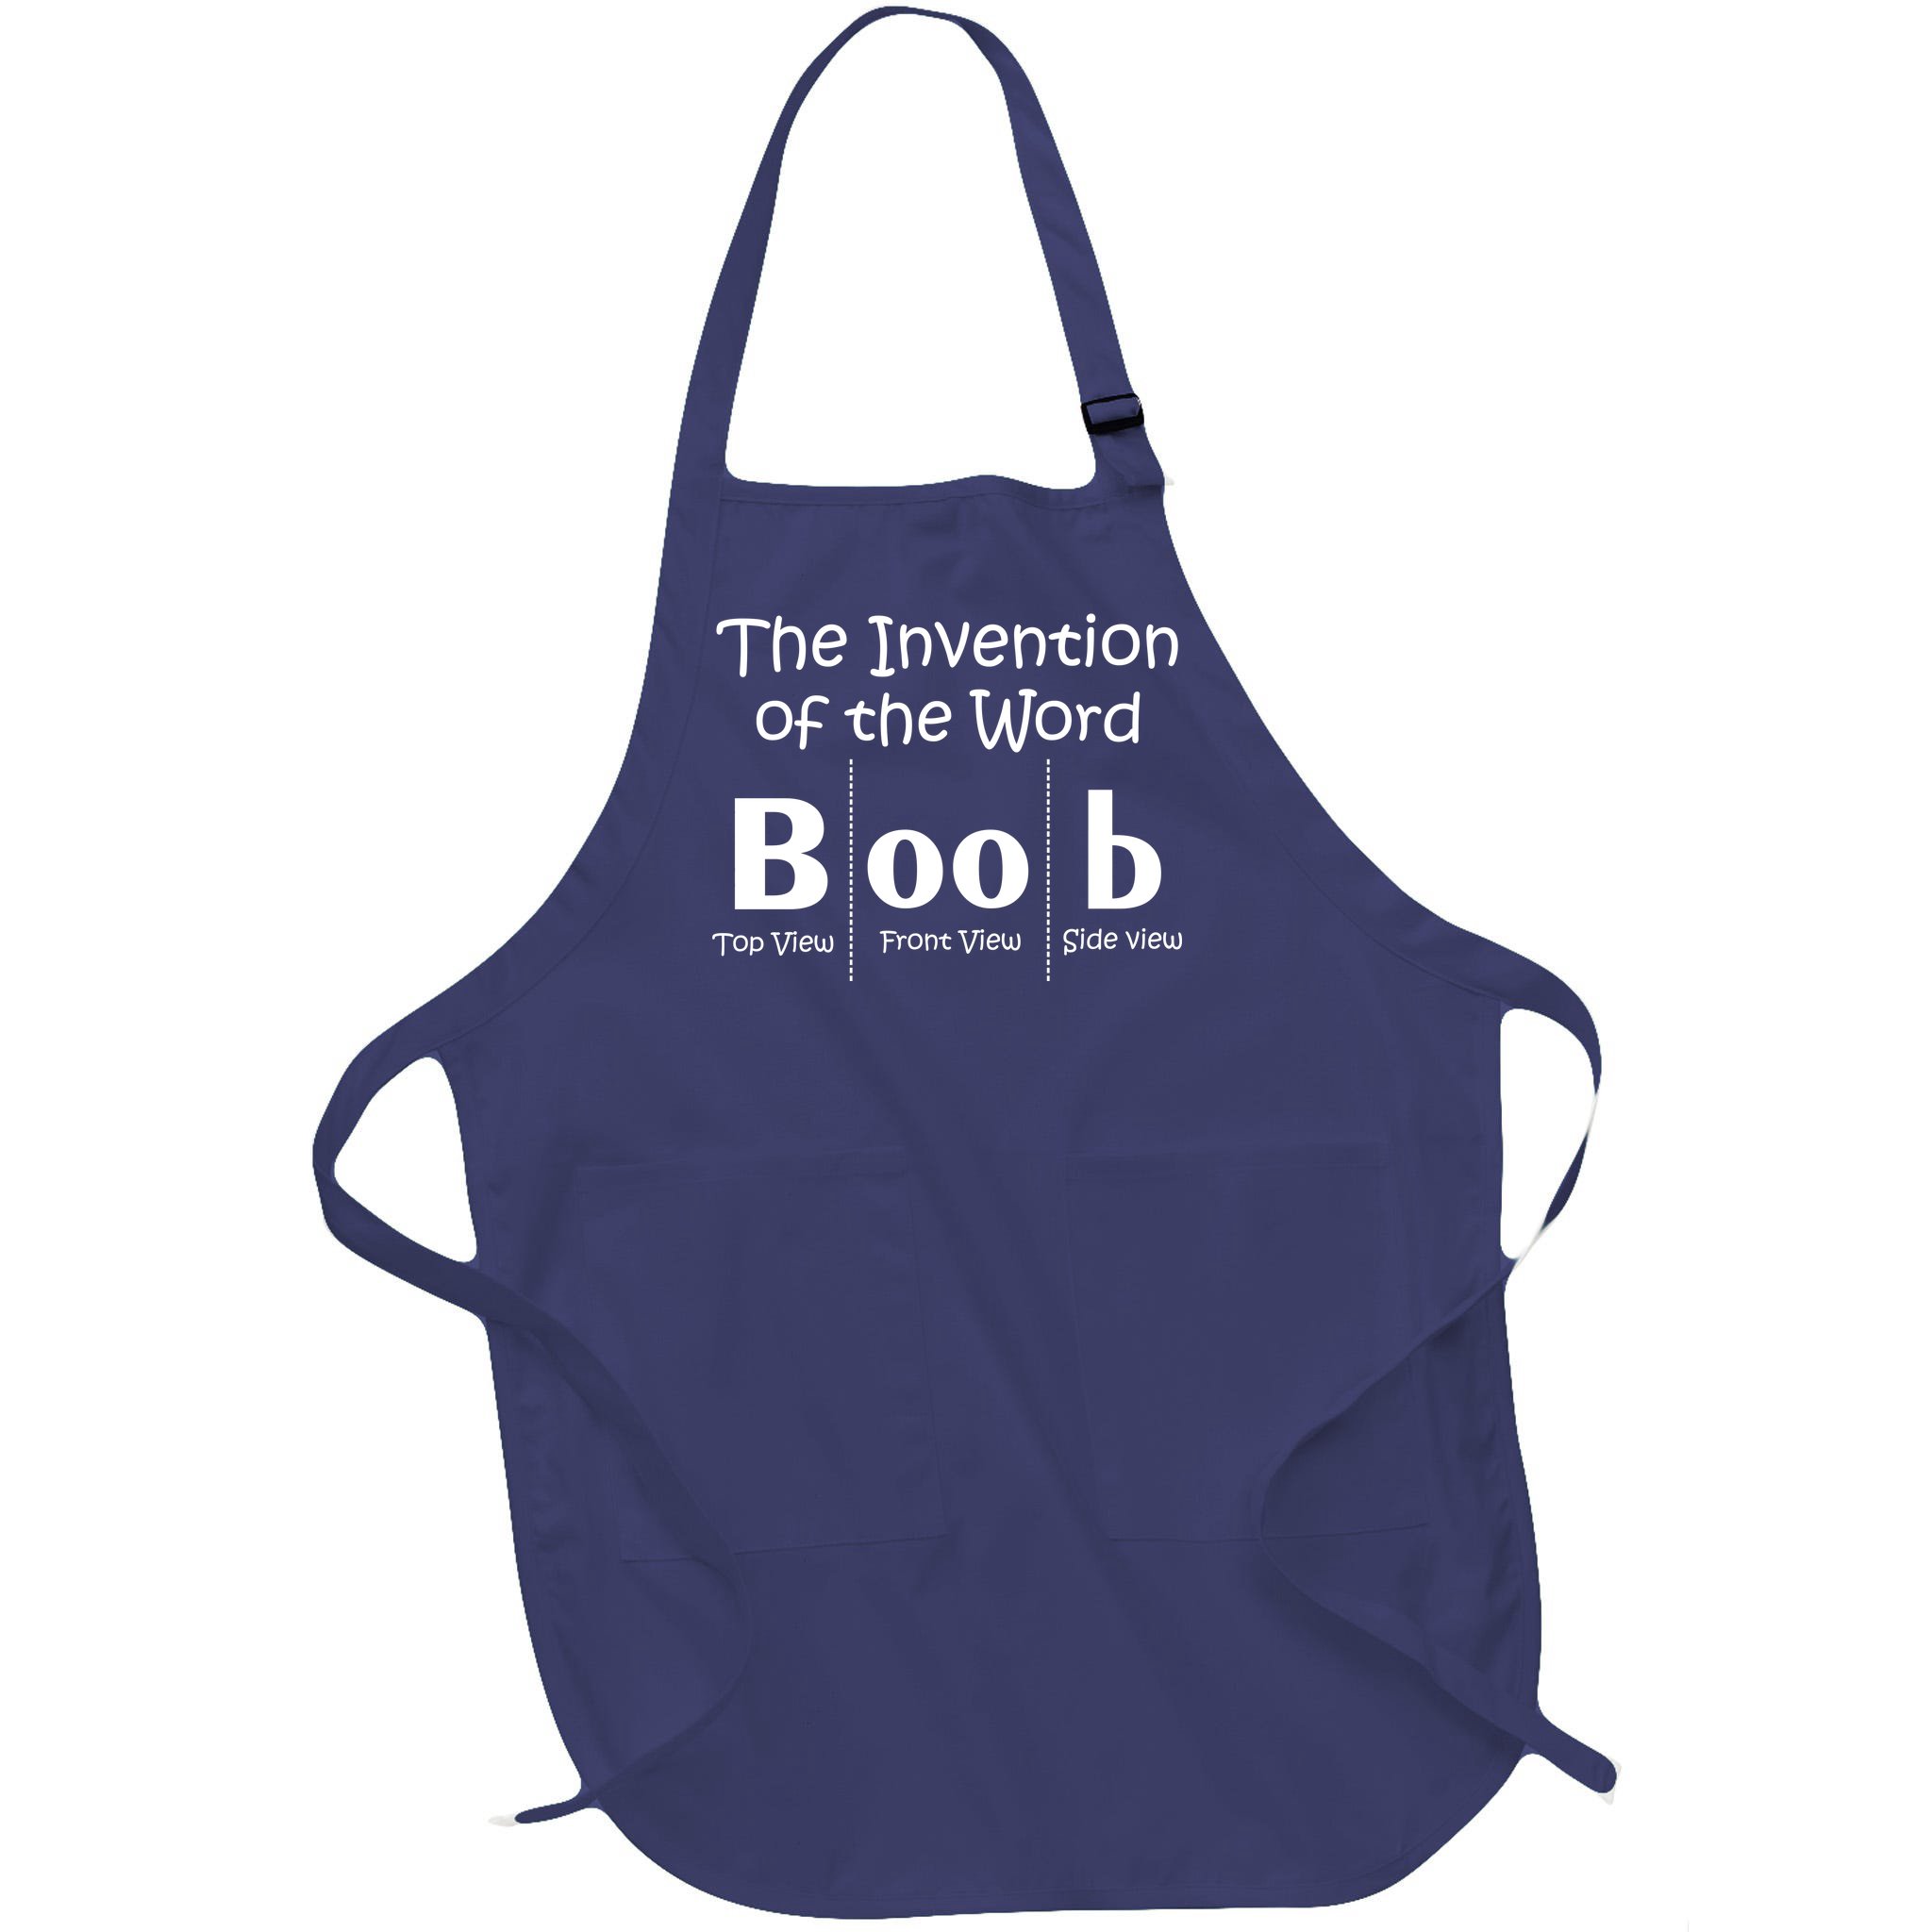 The invention of the word Boob | Sticker